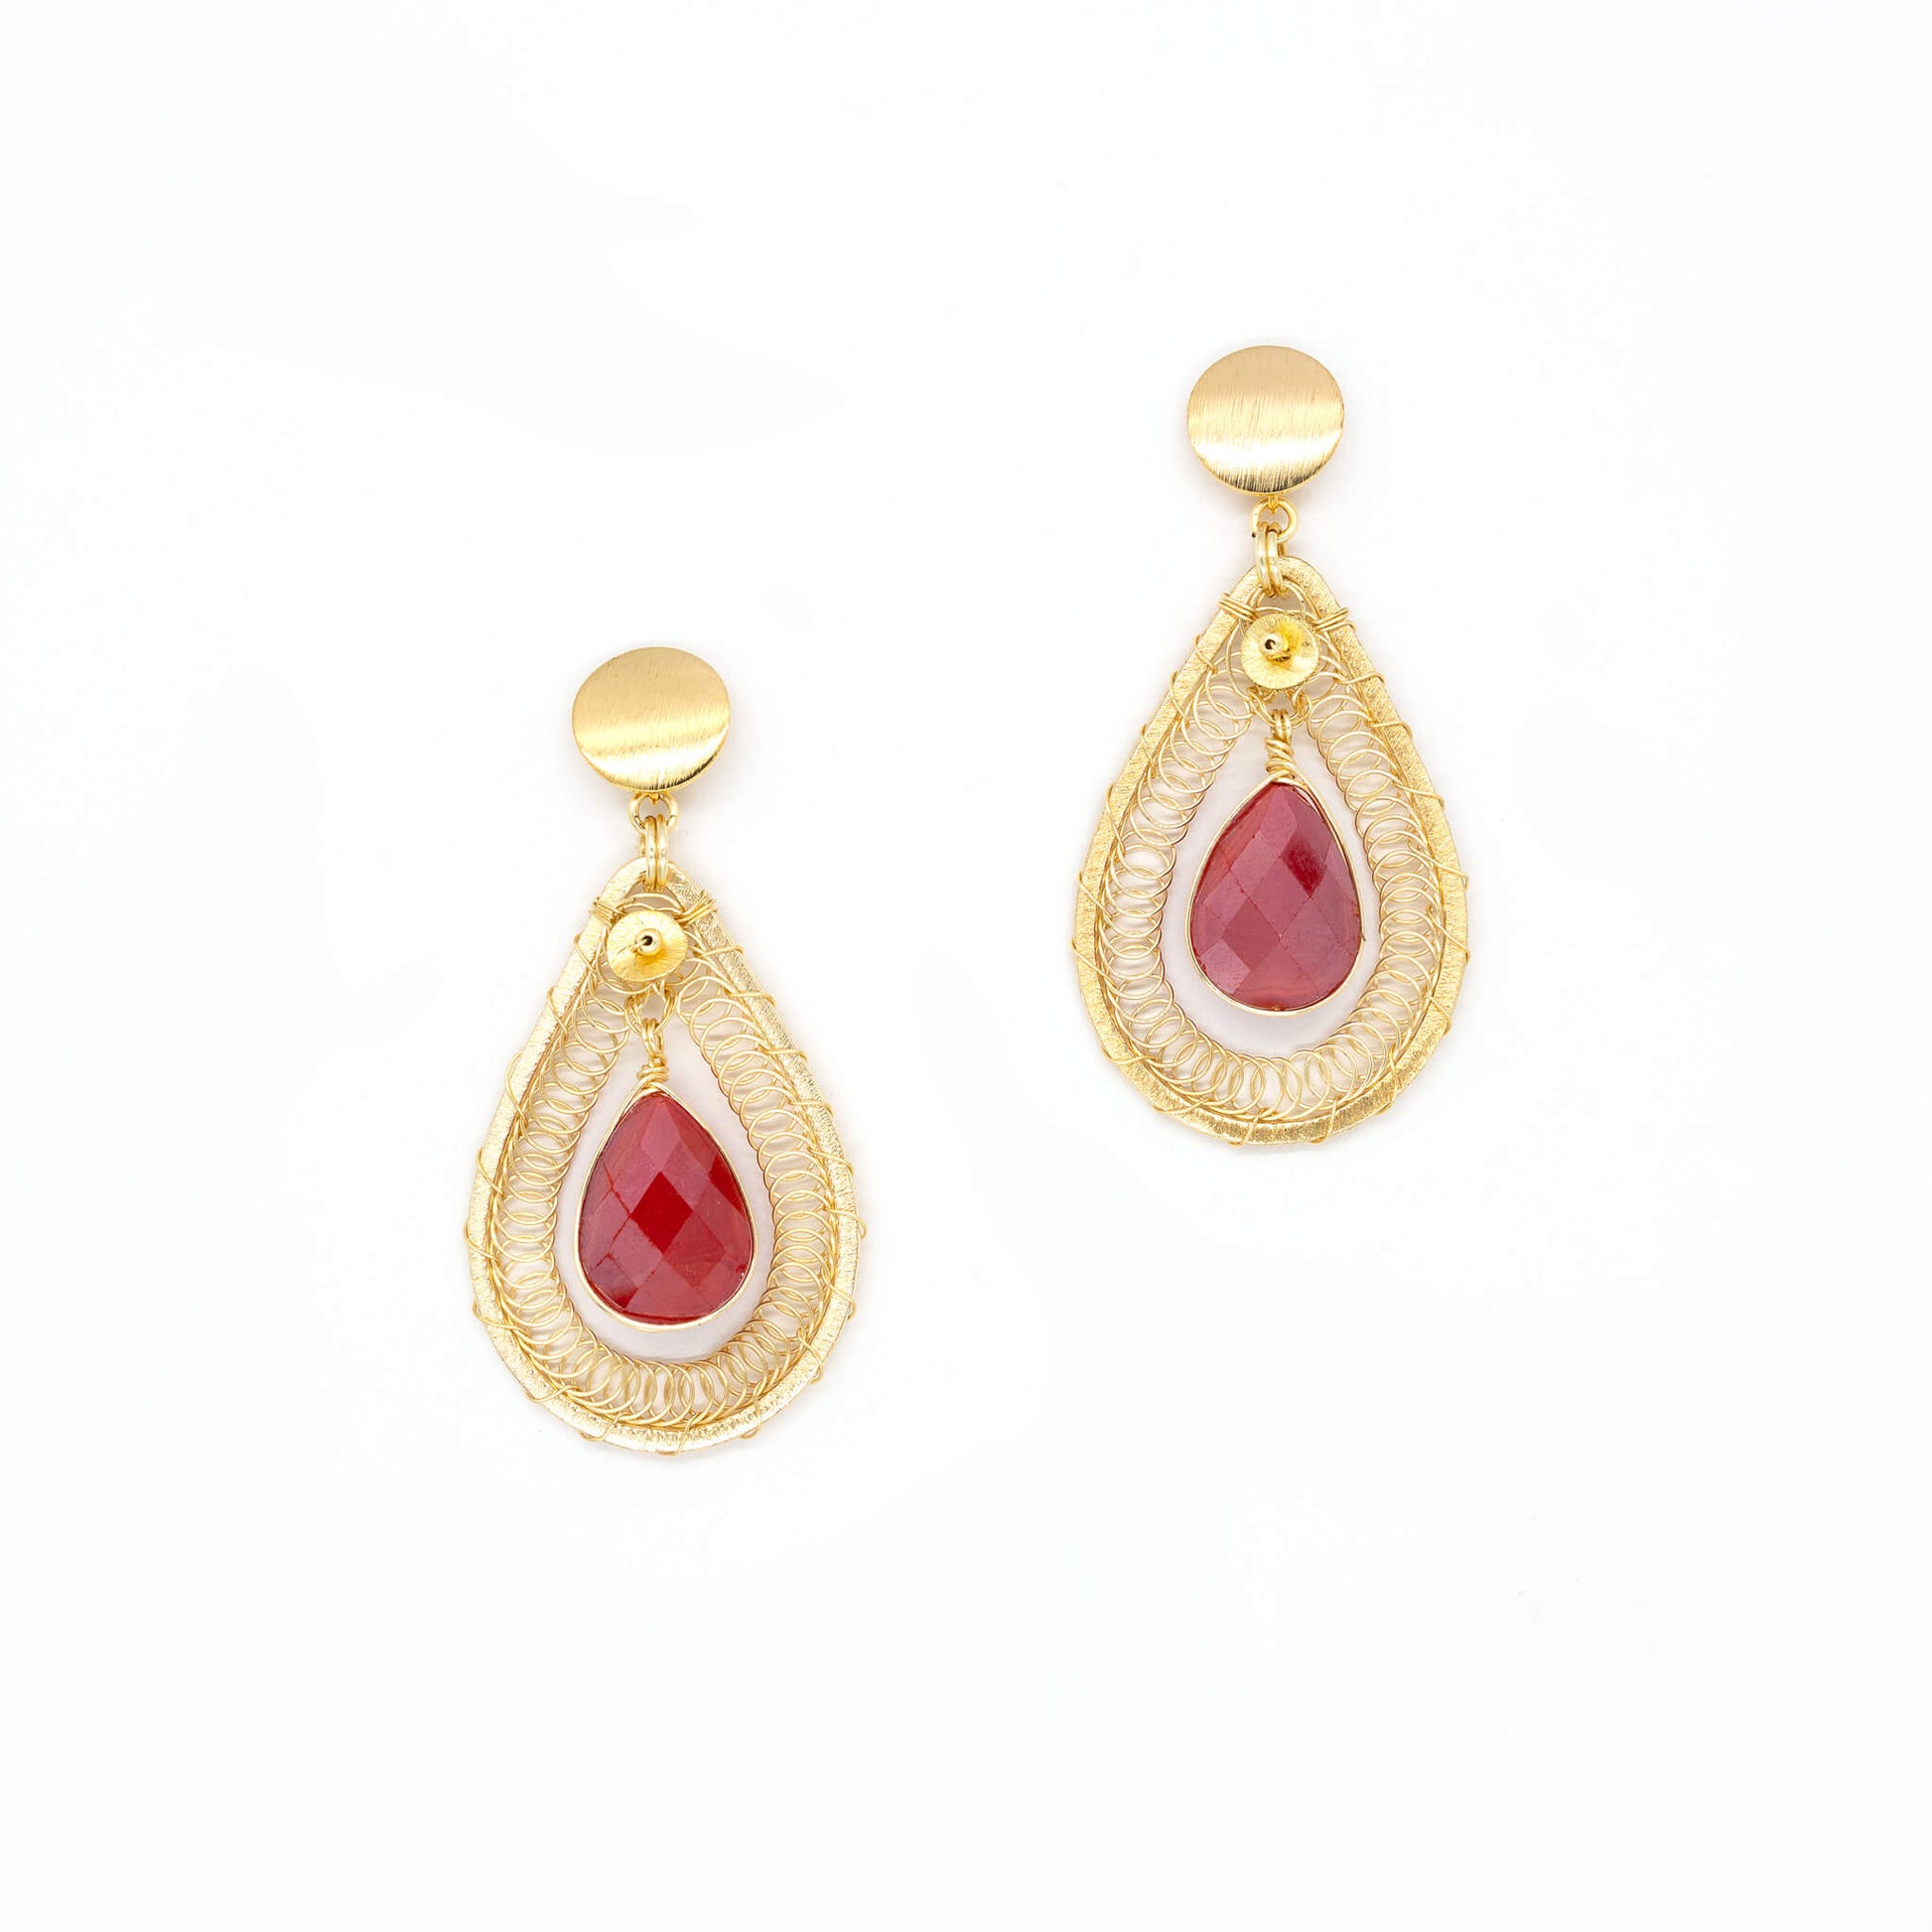 The Ganika teardrop Earrings are 2.25 inches long, Gold and Red Earrings. Wire Wrapped Earrings. Handmade Gold dangle earrings. Feature gold-plated wire and faceted crystal beads.